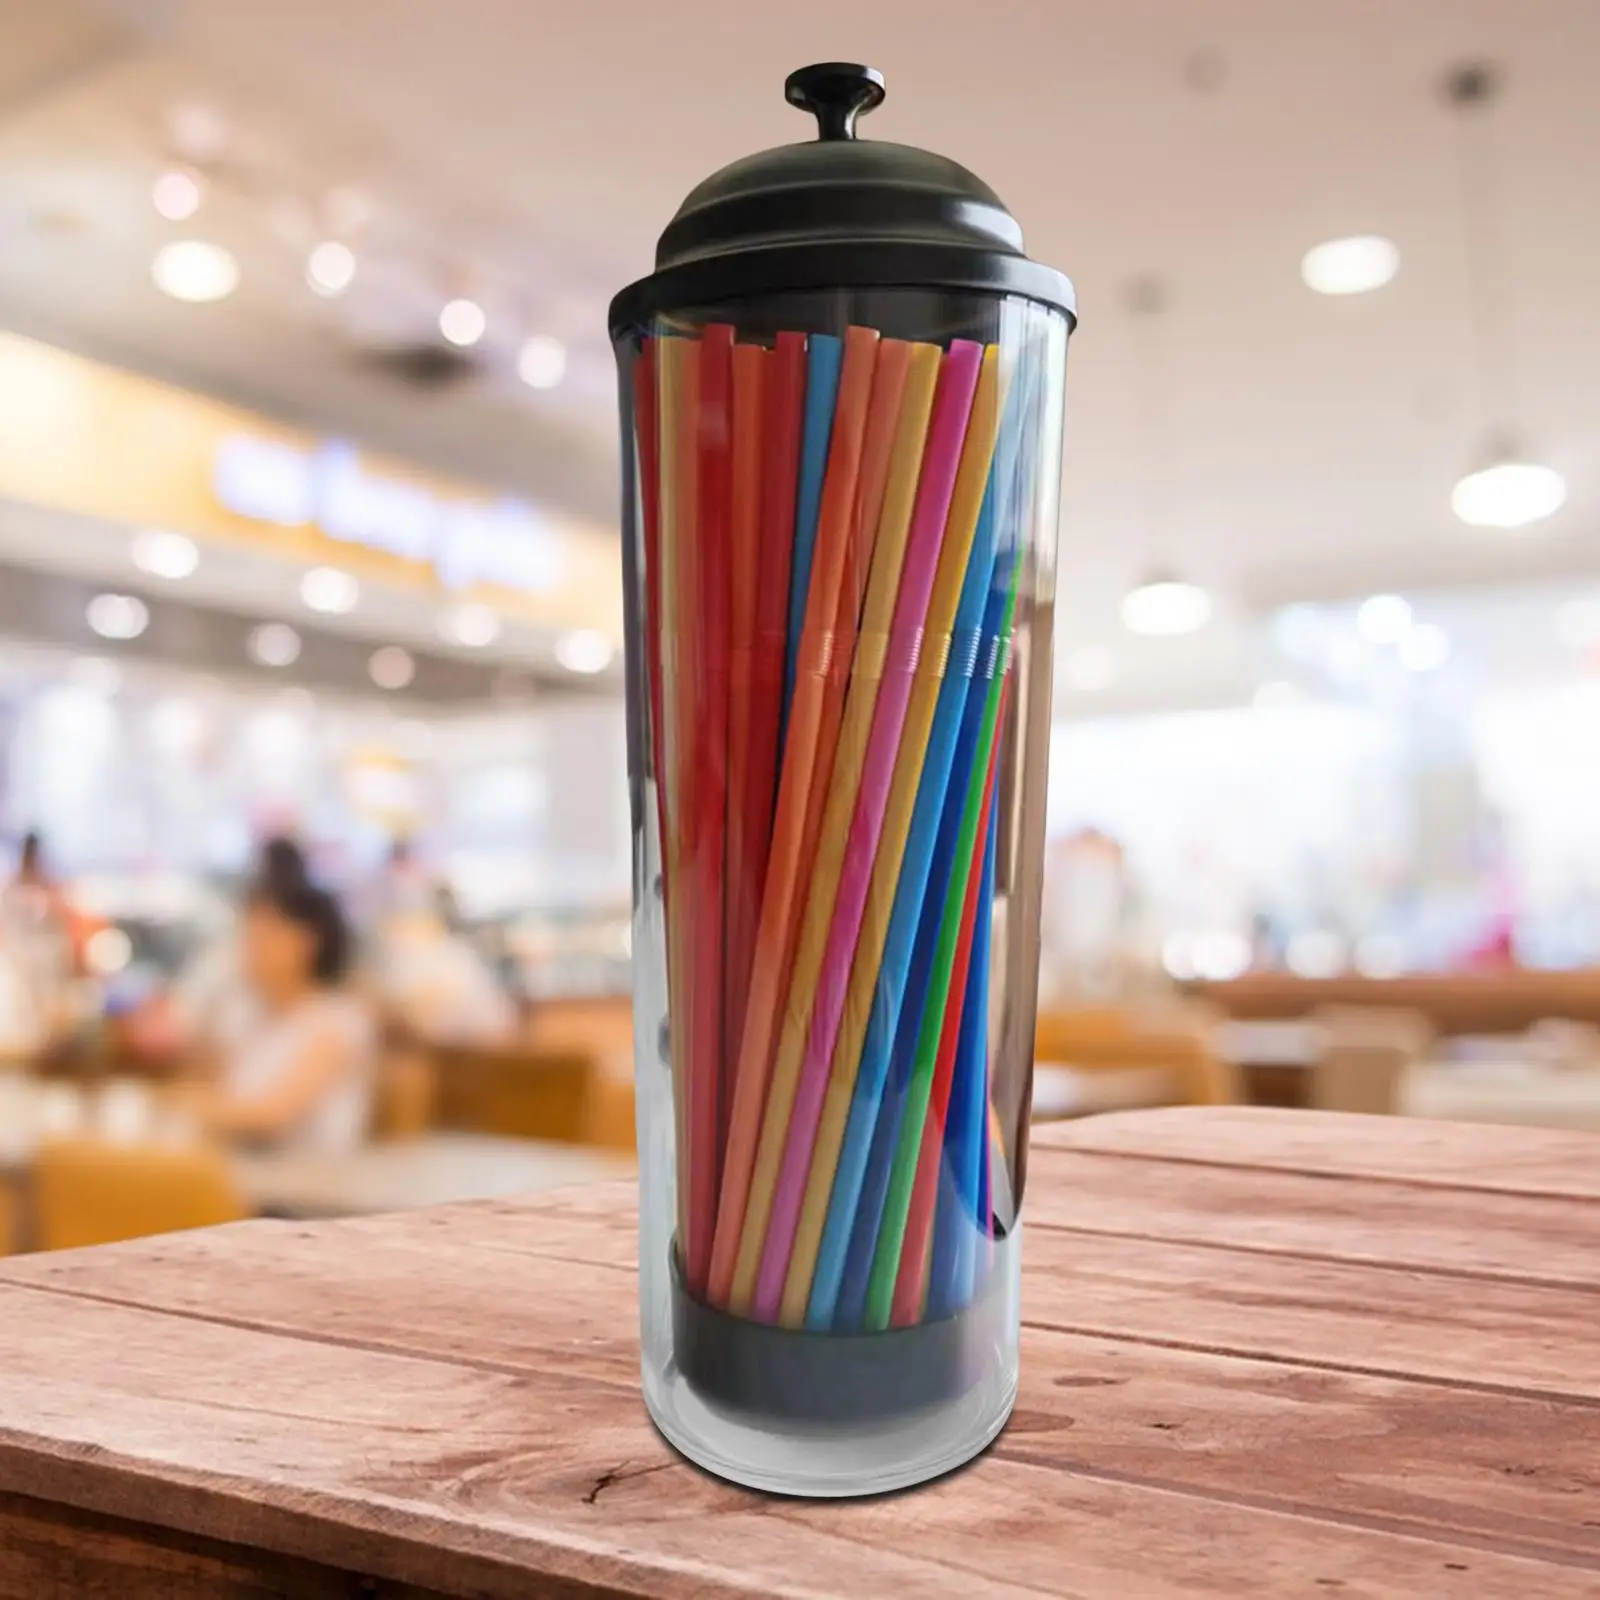 Drinking Straw Organizer Container Drinking Straw Dispenser Straw Dispenser Straw Holder with Lid for Store Home Dining Room